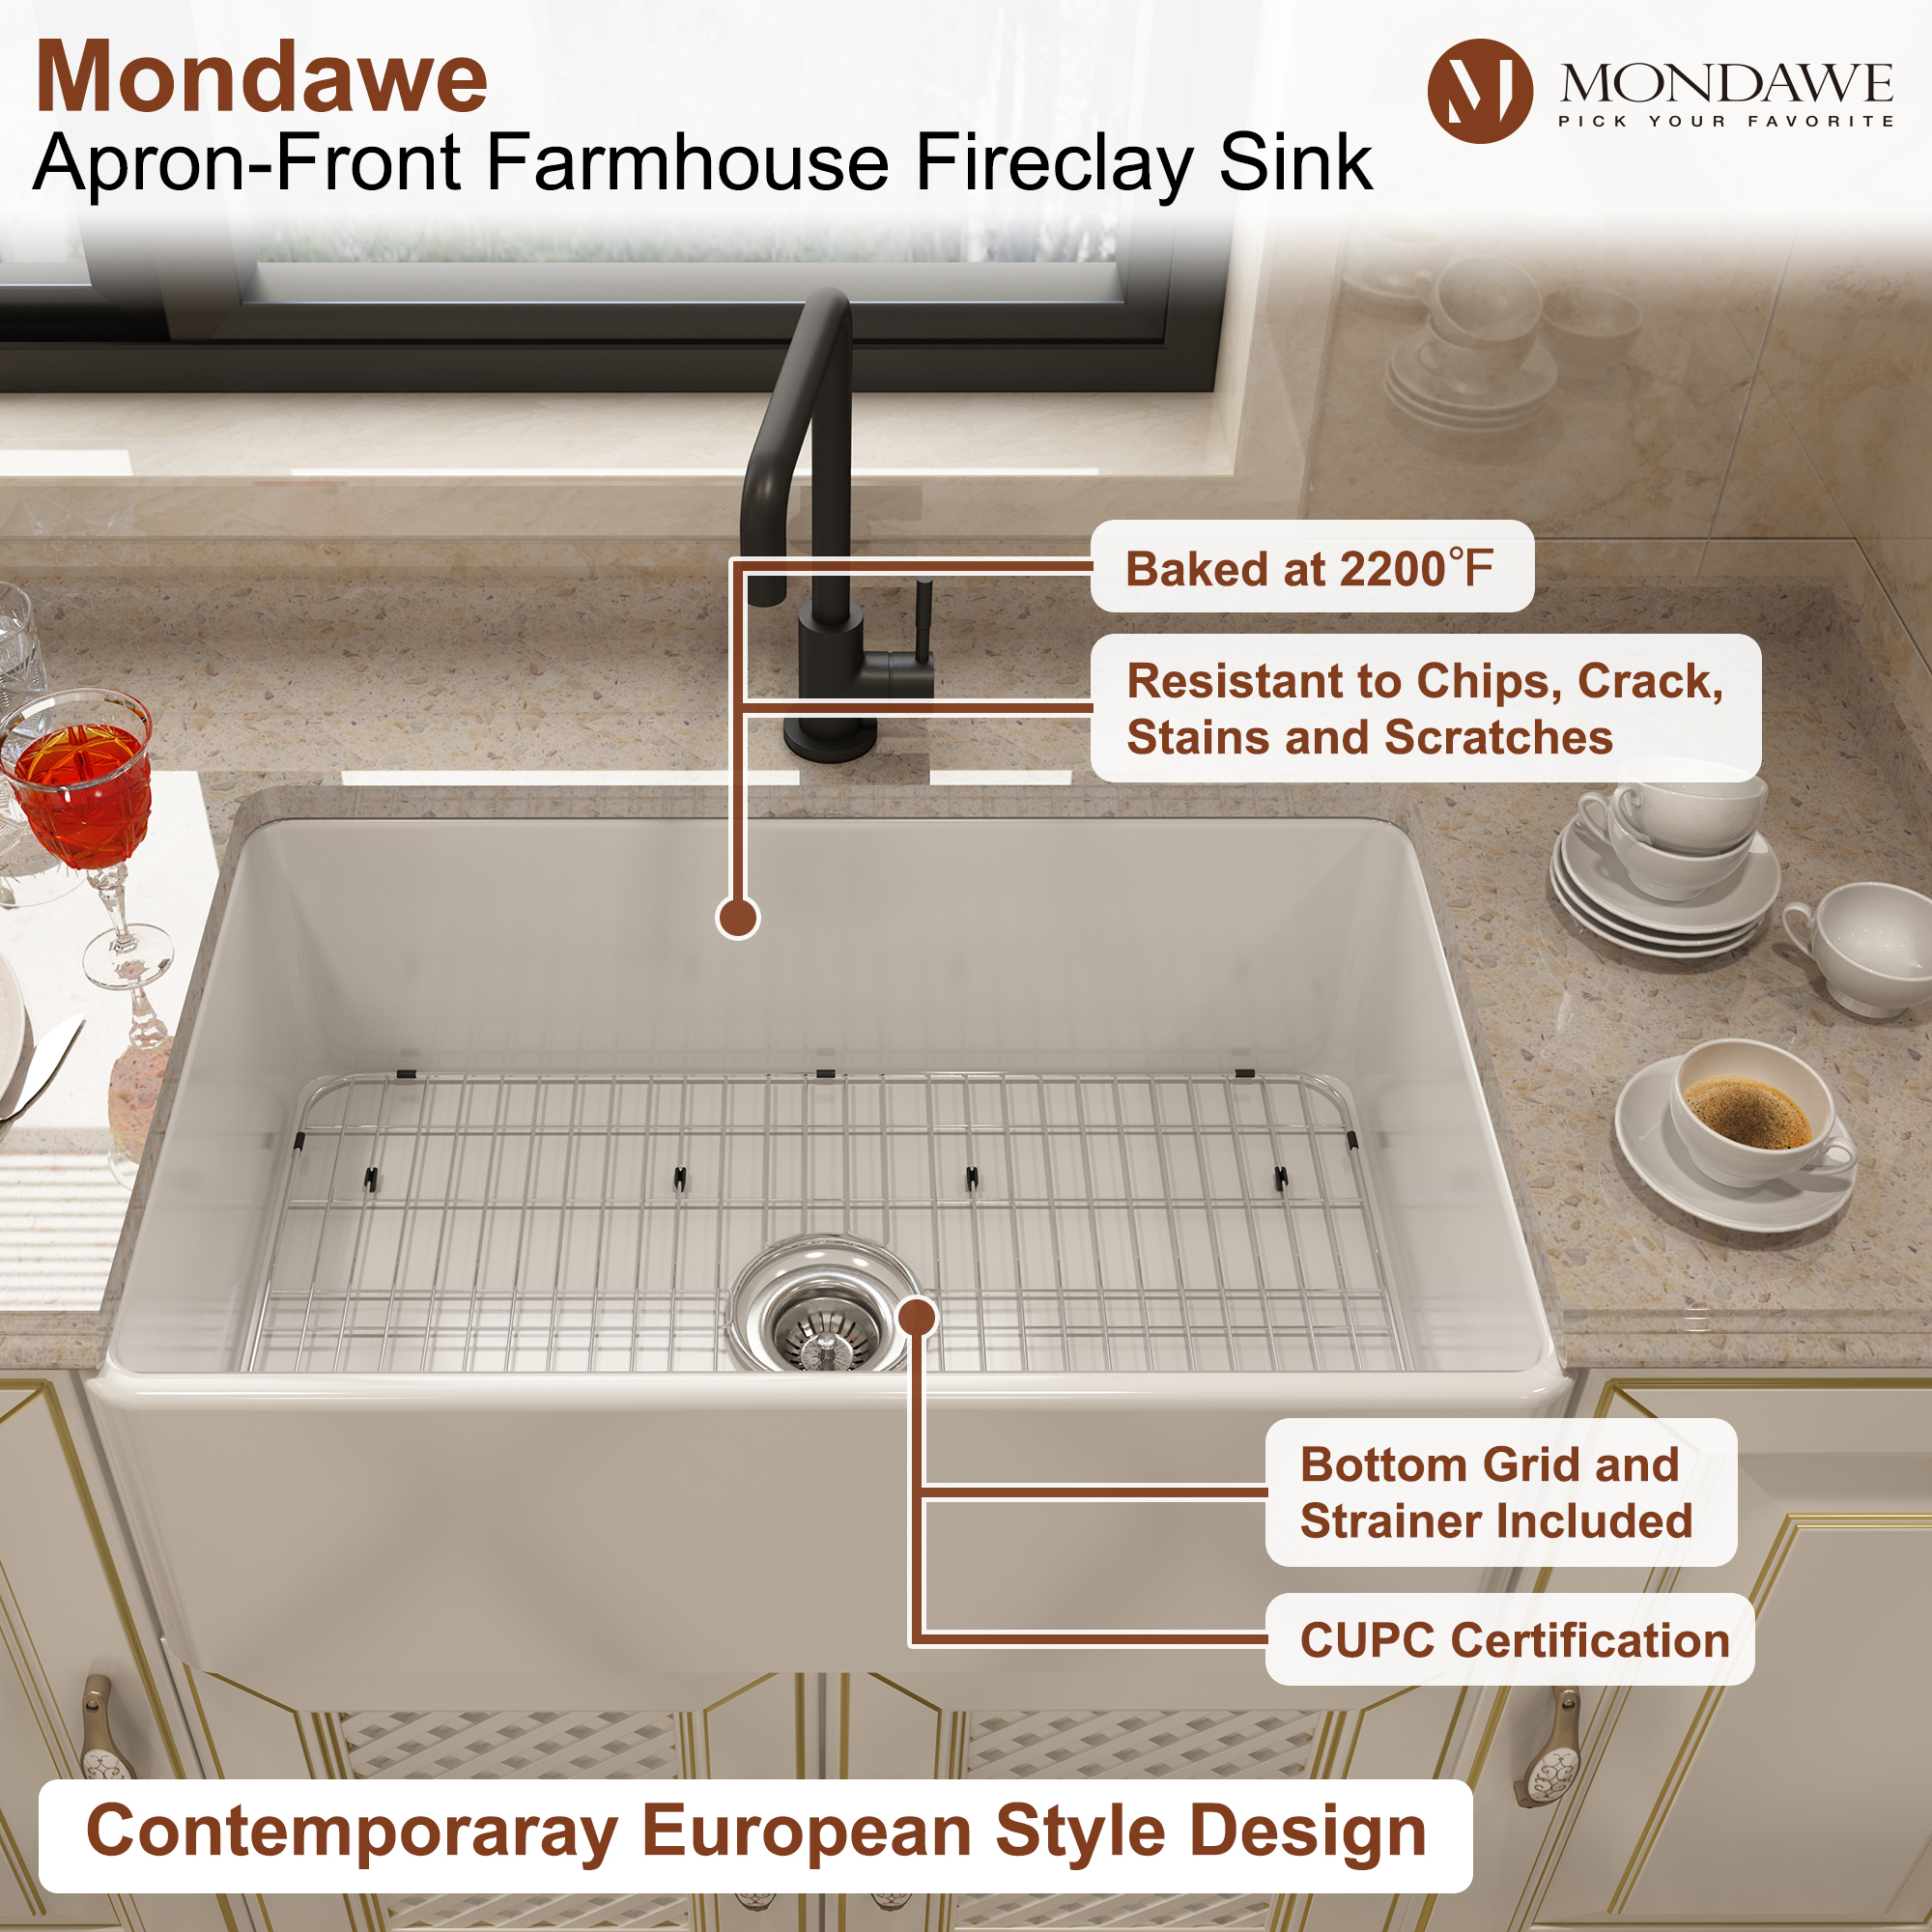 Farmhouse 33 in. single bowl fireclay kitchen sink in white comes with high-arc kitchen faucet-Mondawe